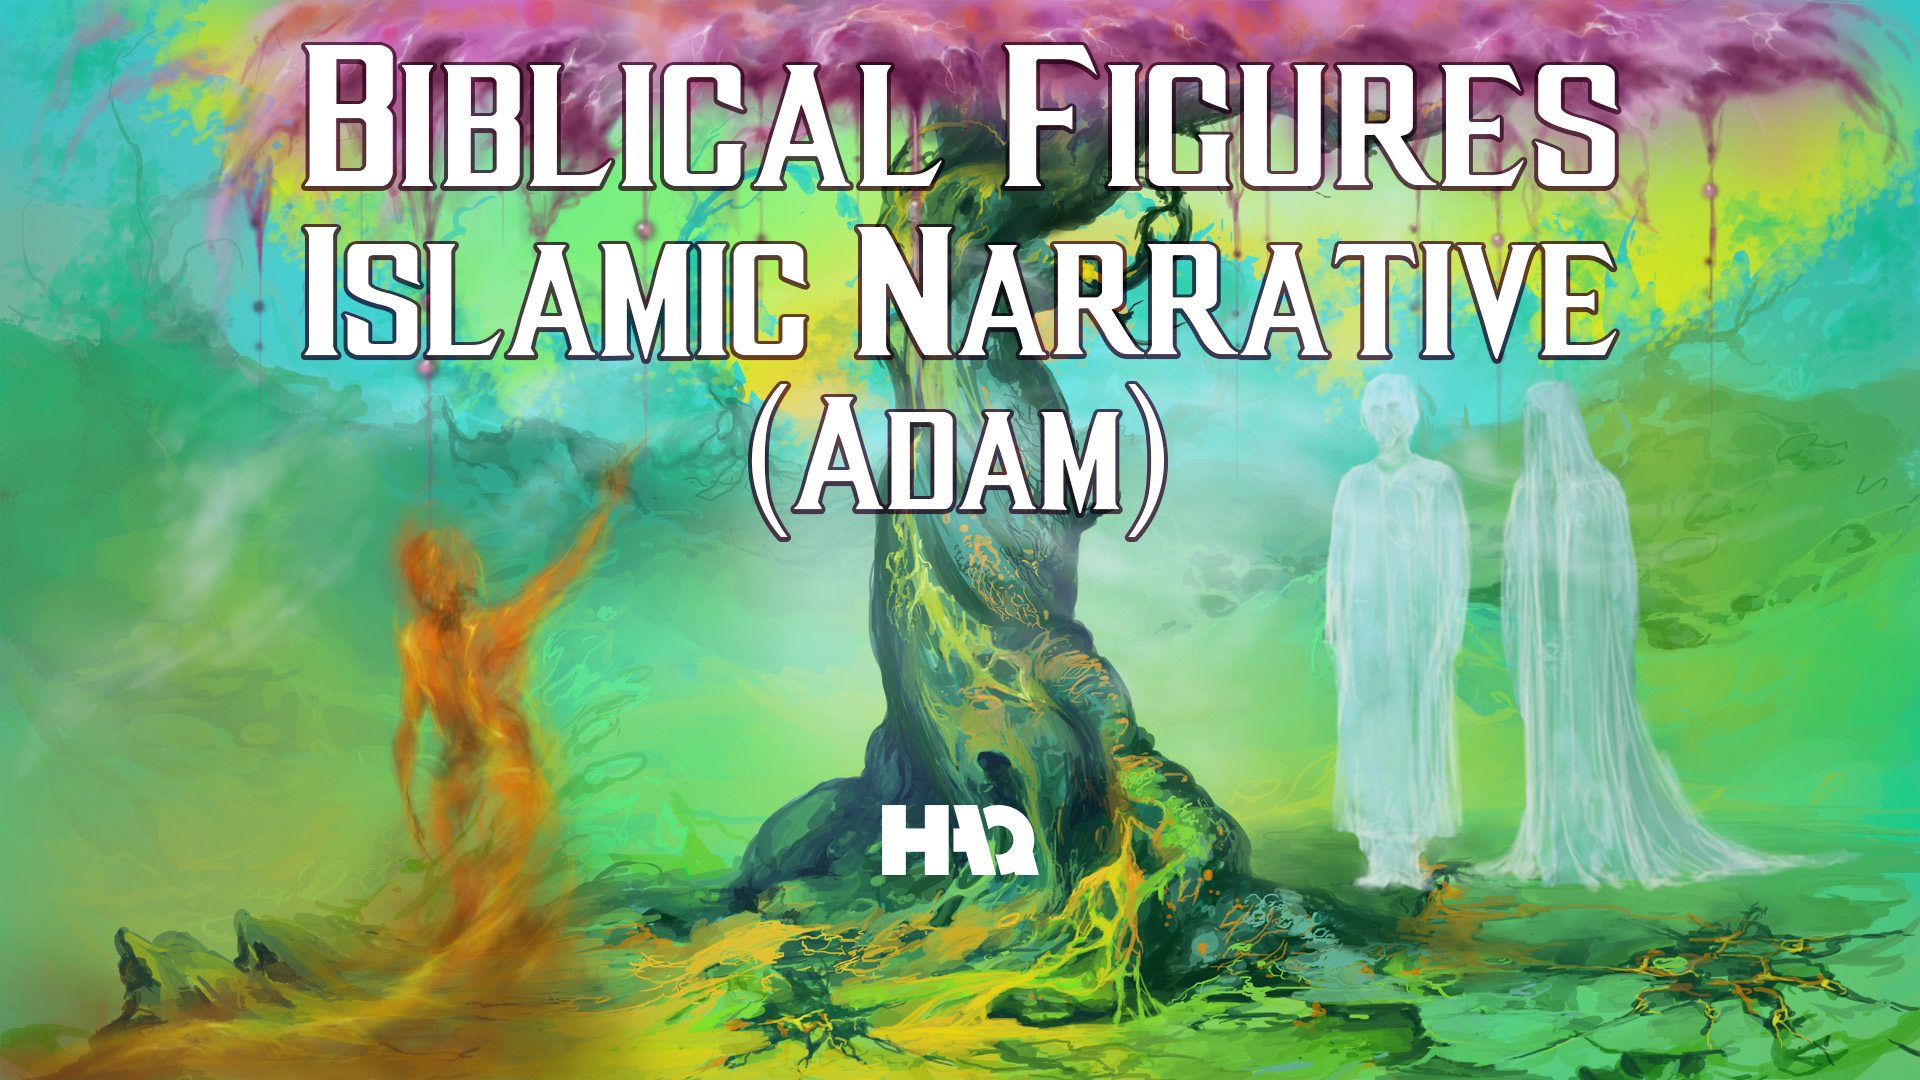 do-you-know-the-story-of-adam-eve-in-islam-haq-adam-and-eve-story-prophet-stories-adam